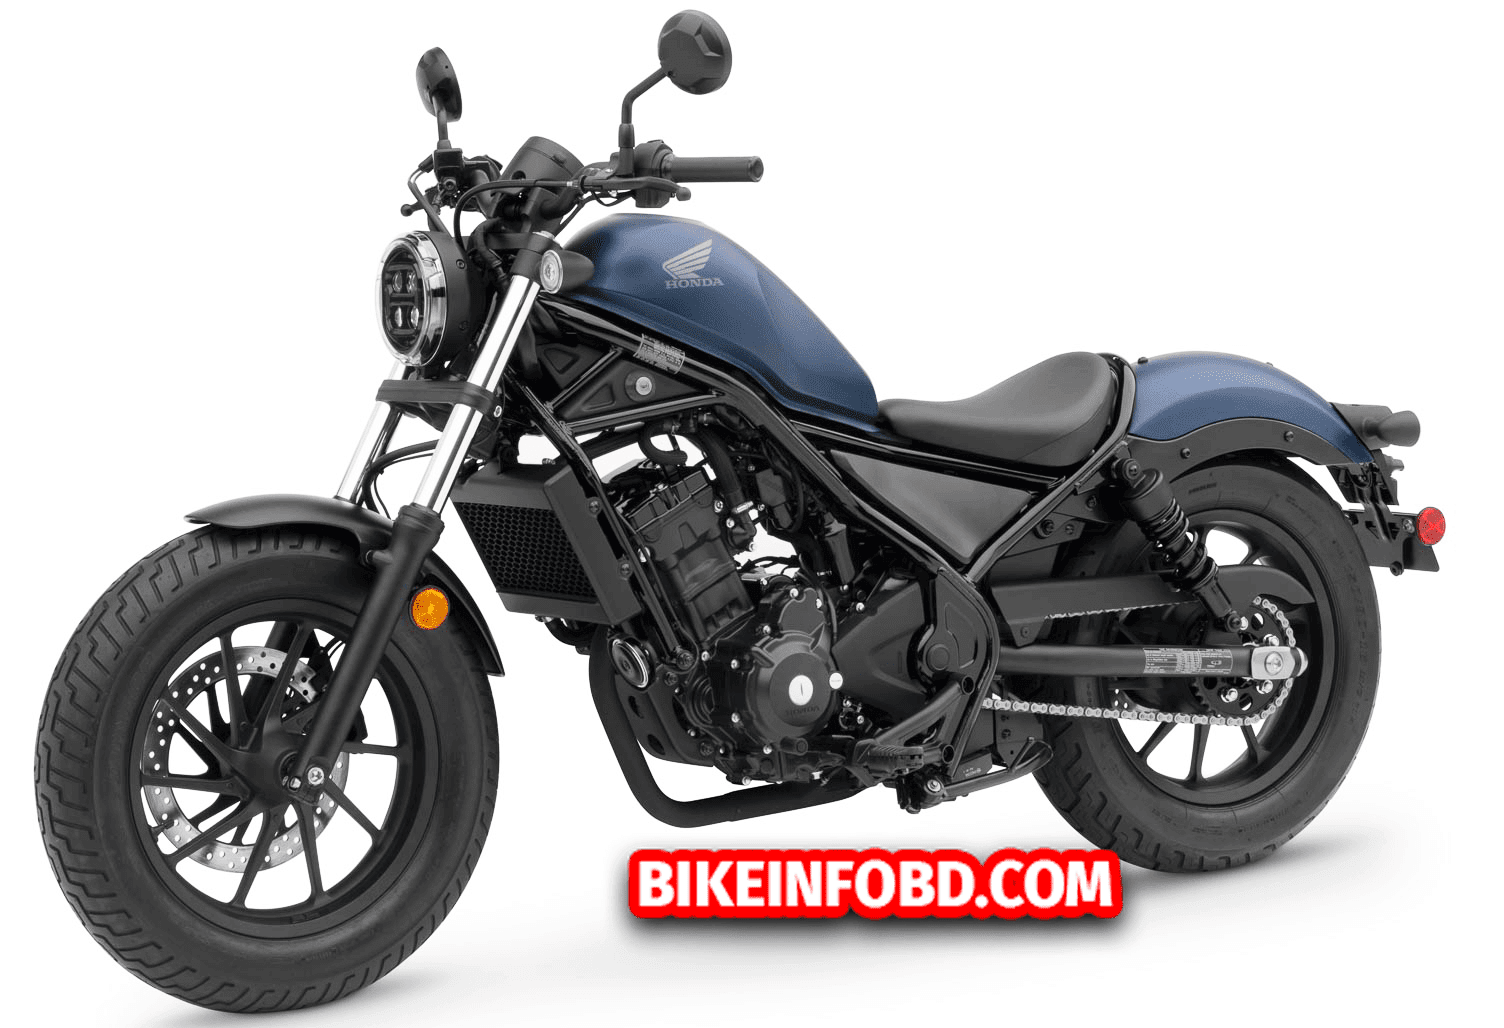 Honda CMX 500 Rebel Specifications, Review, Top Speed, Picture, Engine ...